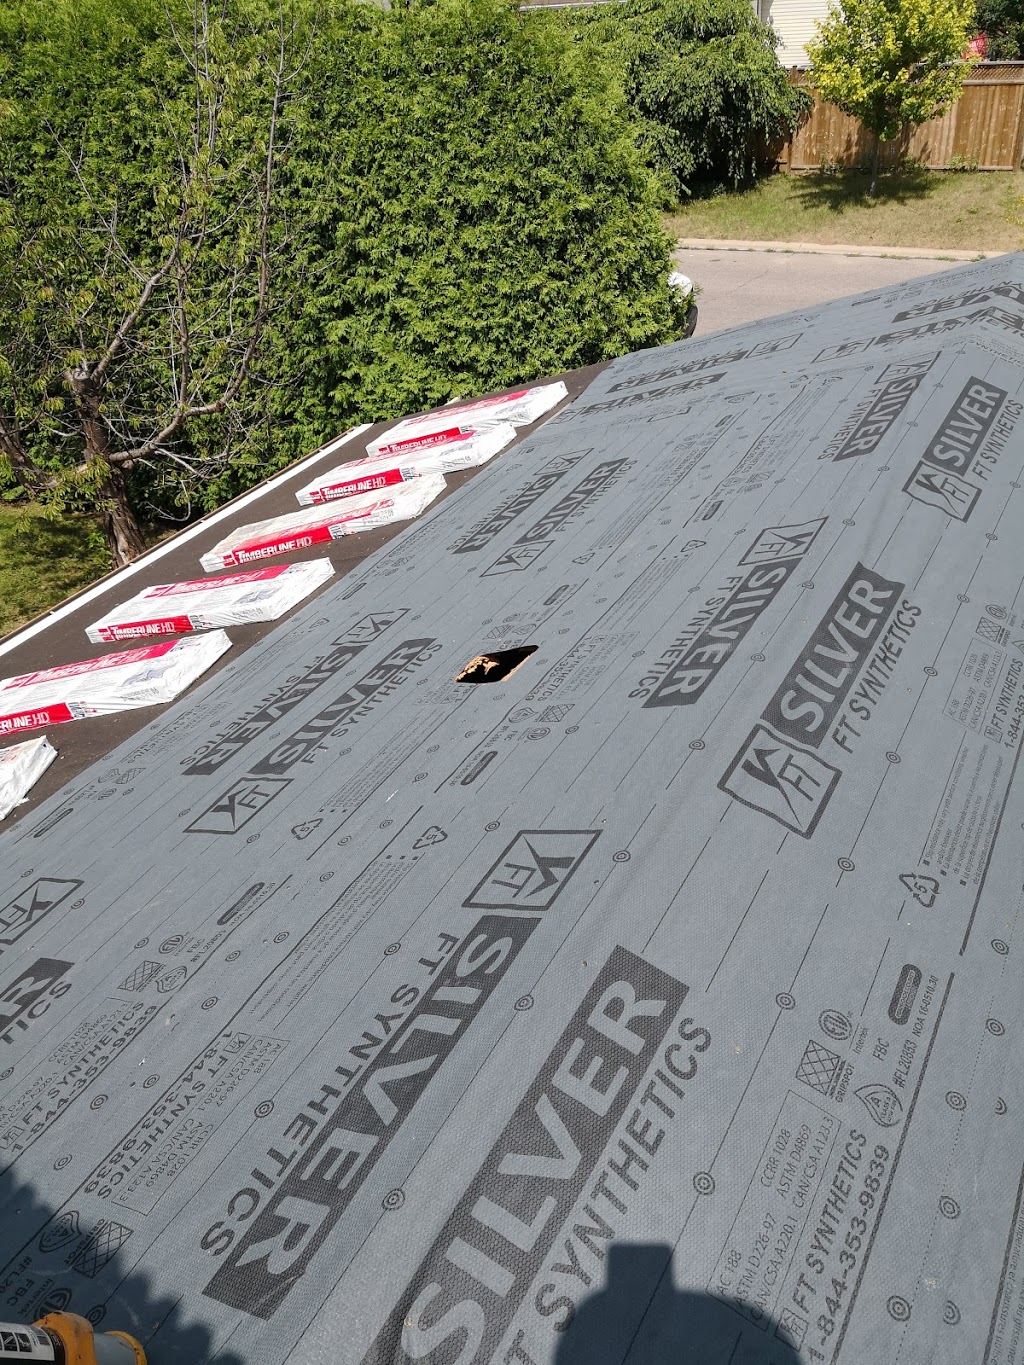 Extop Roofing Ltd | 400 Cresthaven Dr, Nepean, ON K2G 4P4, Canada | Phone: (613) 686-1234